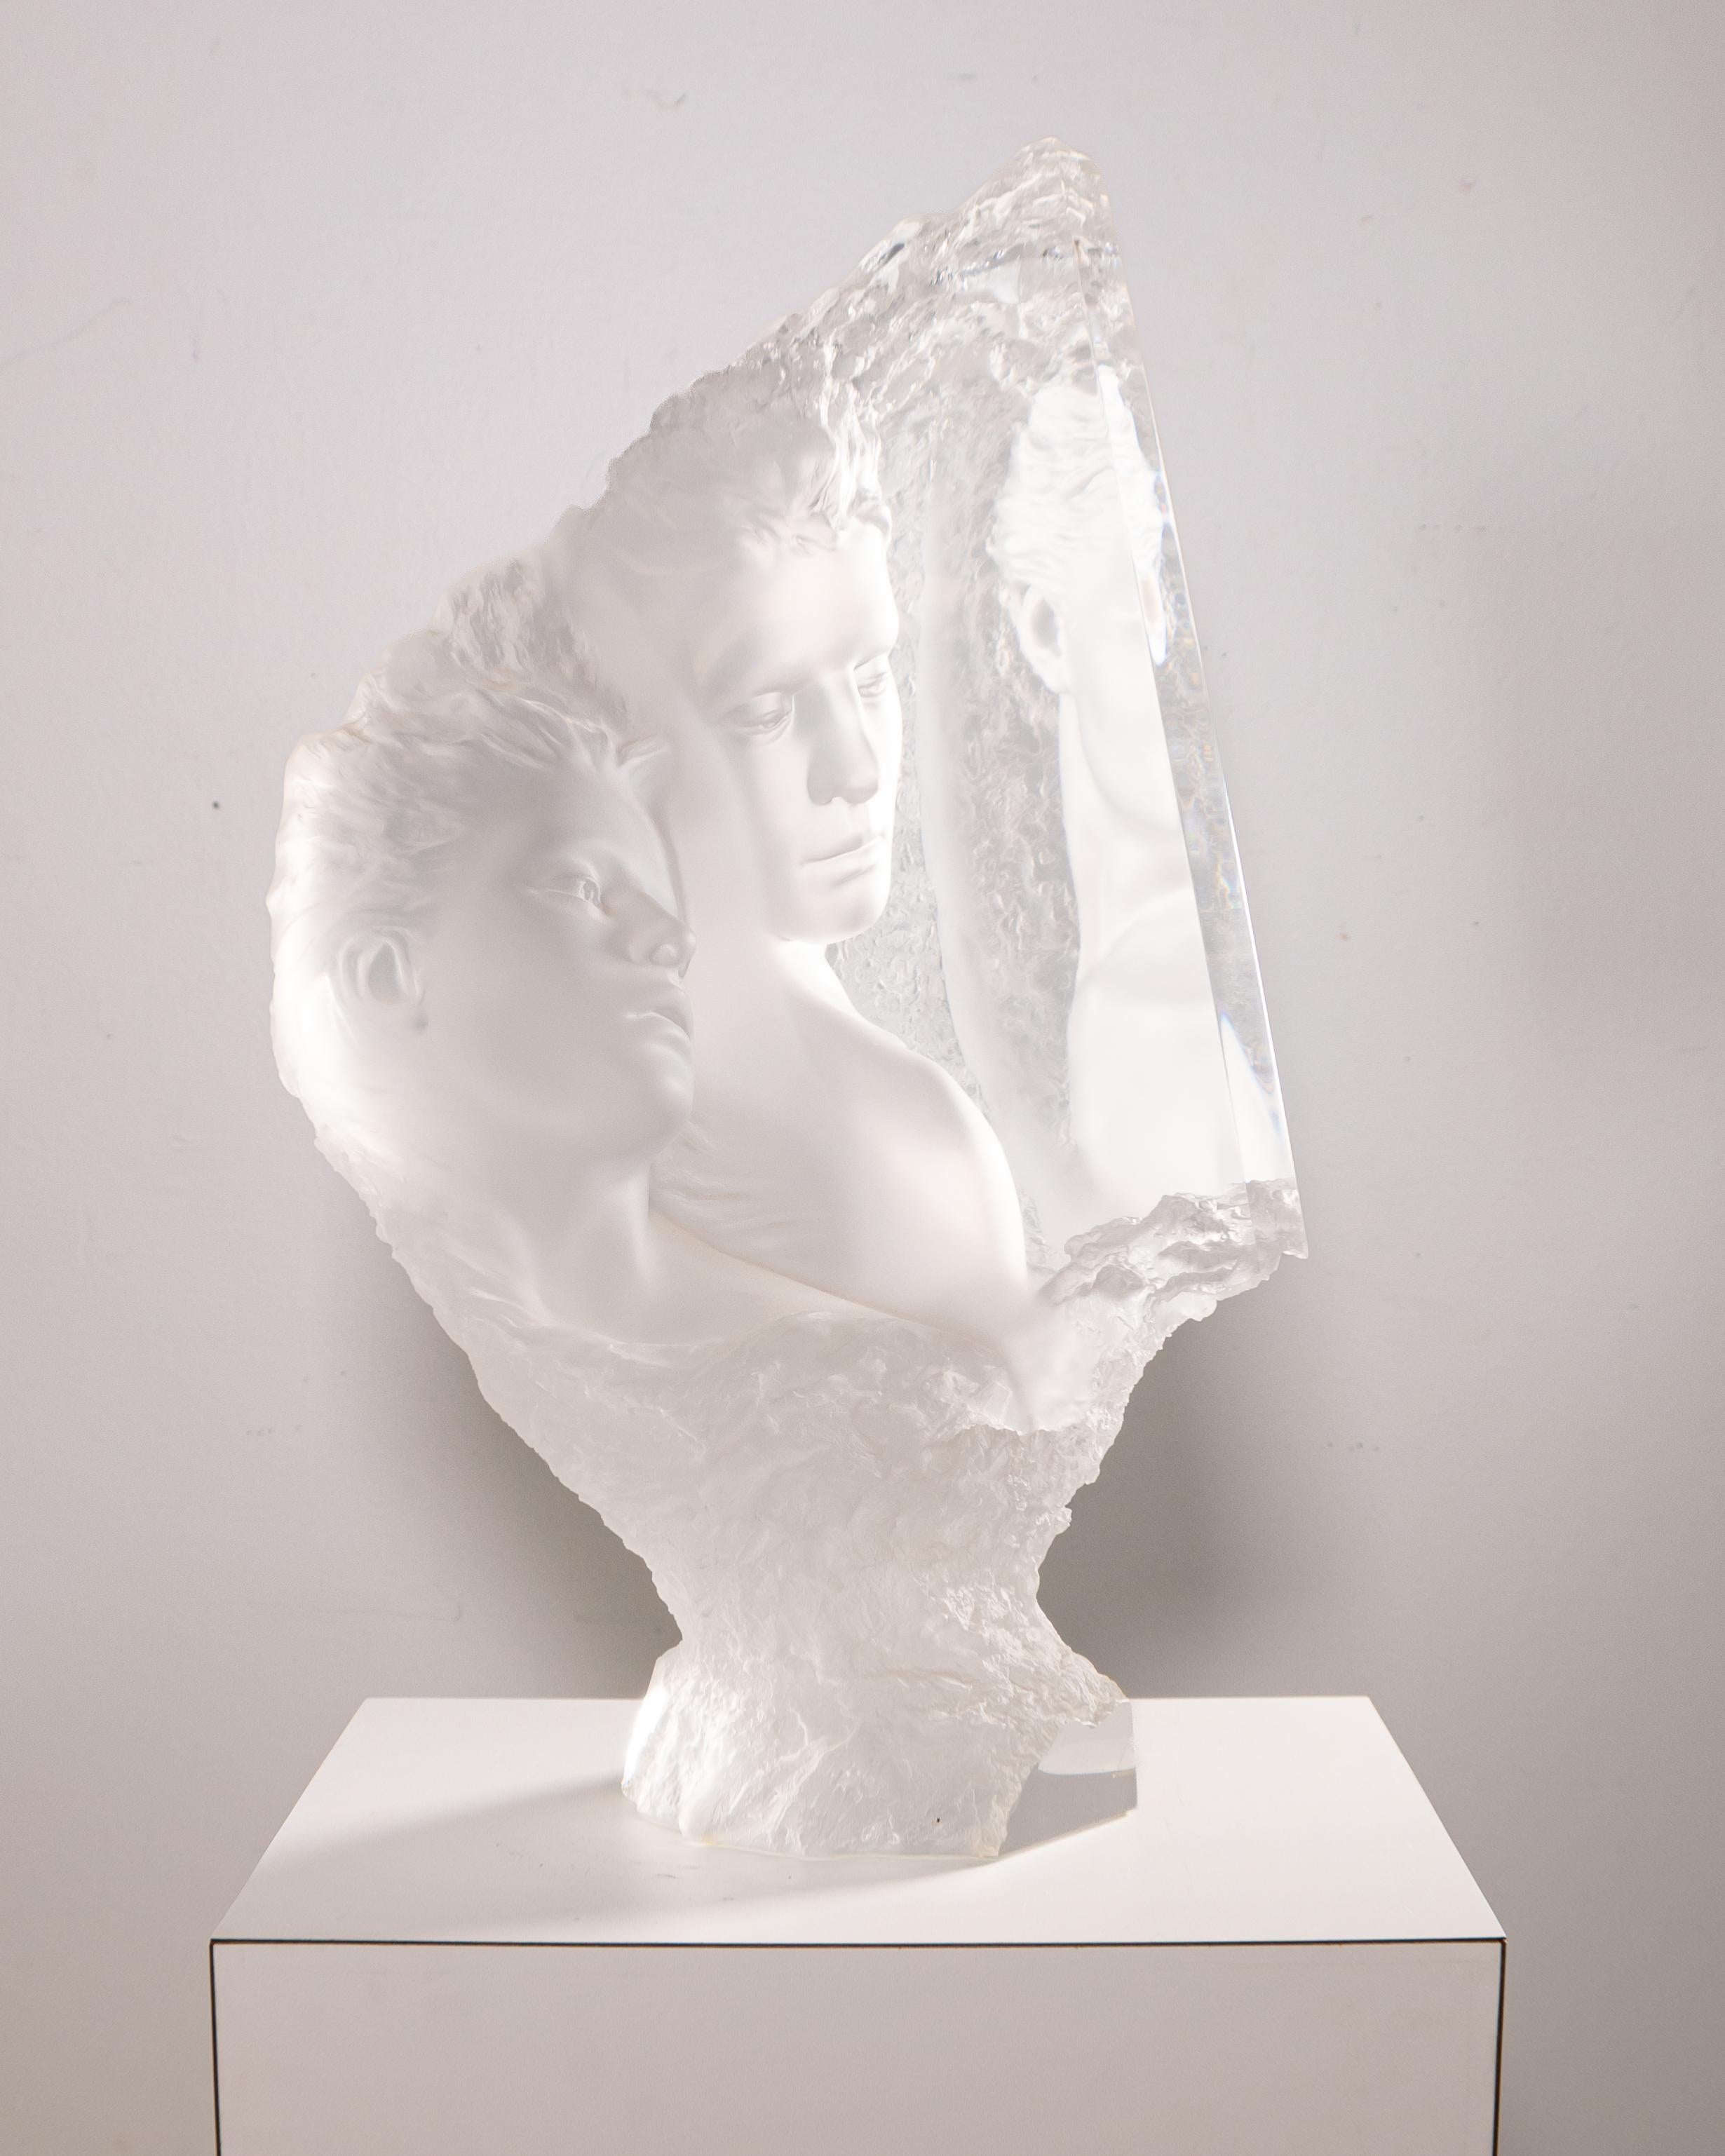 An ethereal acrylic sculptured called 